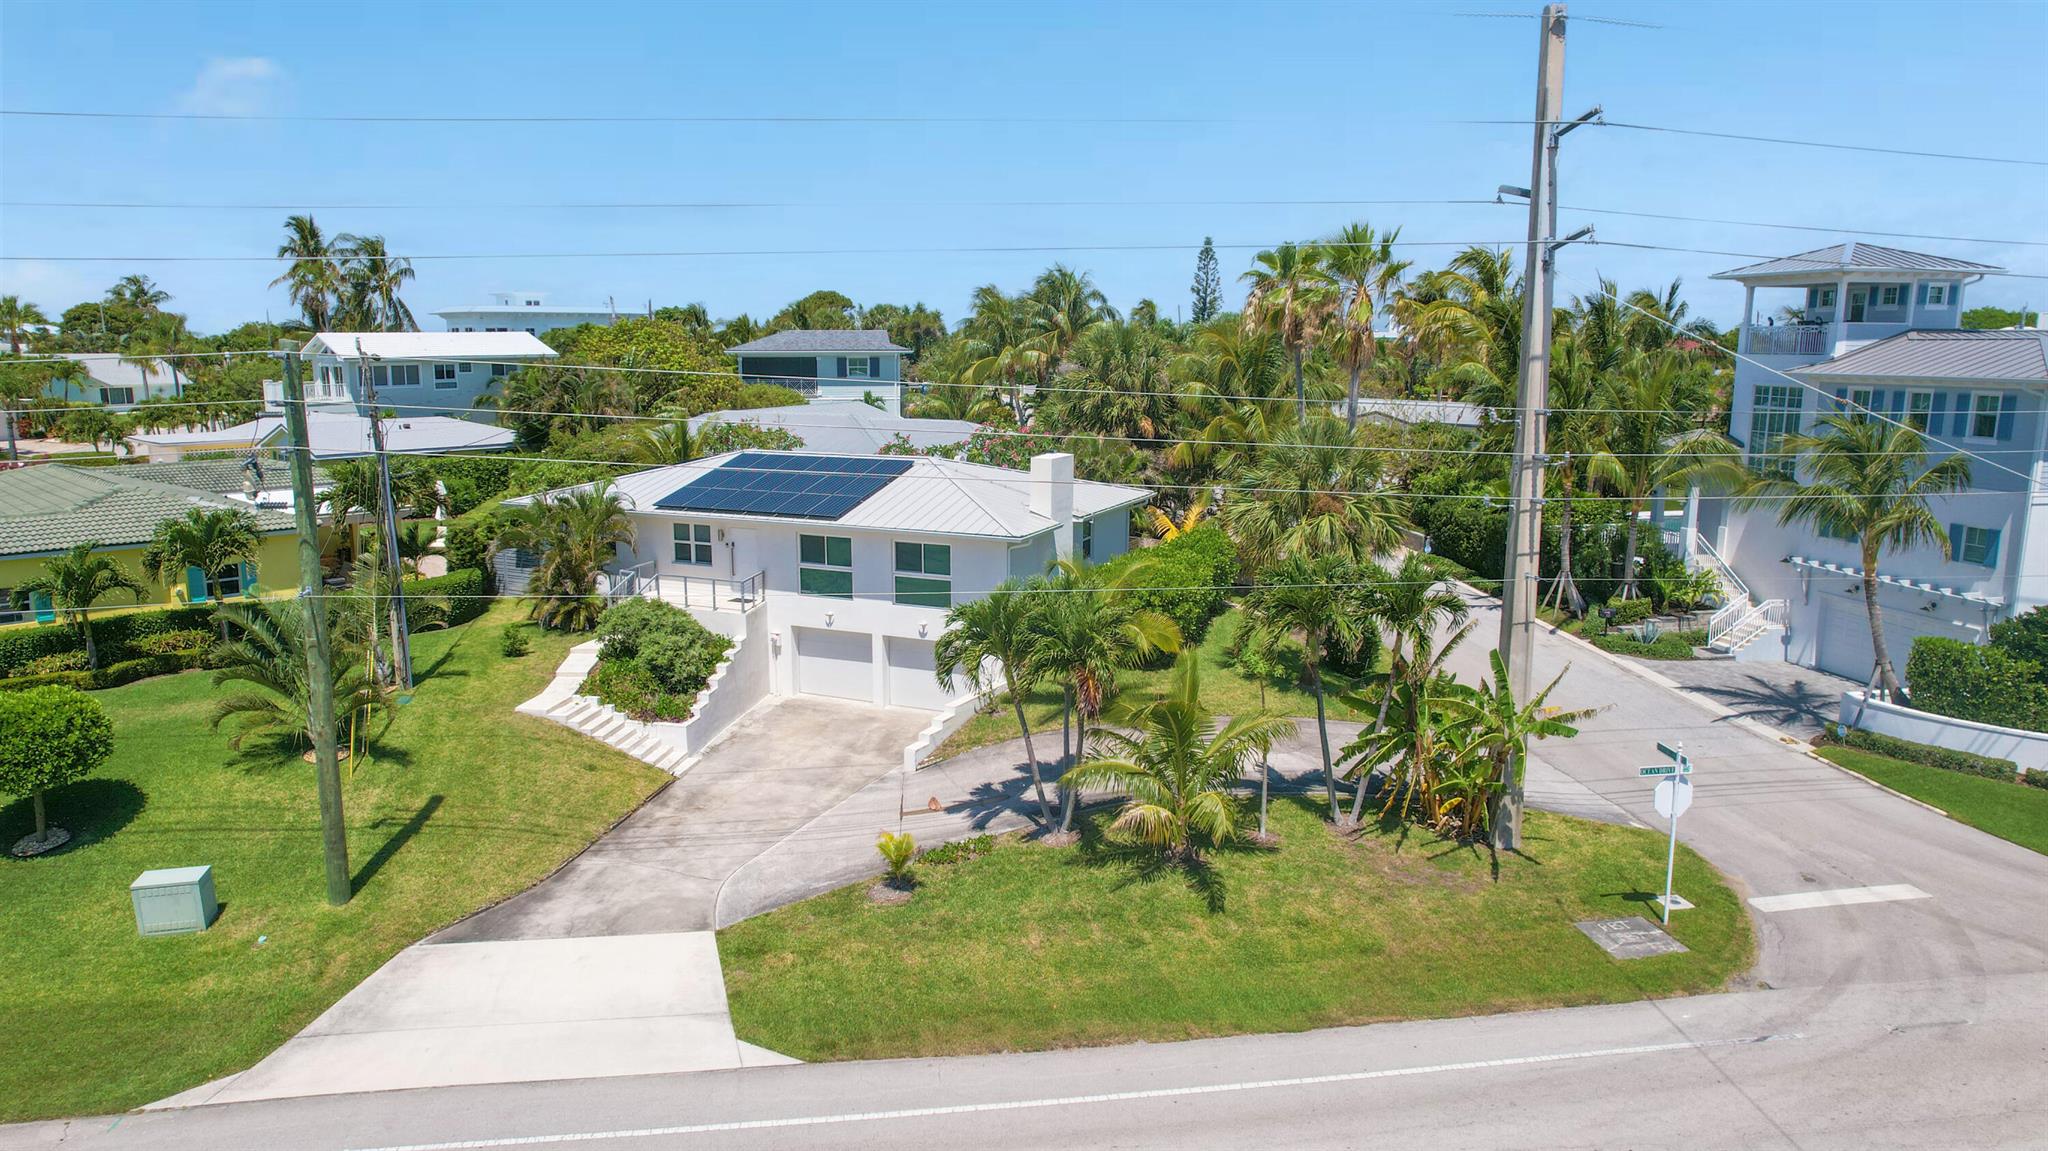 Be ready to fall in love with your beach area retreat in Juno Beach. This lot has the opportunity for ocean views if you build up. It sits high above Ocean Drive with beautiful views of Pelican Lake. The home was renovated with all of the attention to detail.  There are 3 bedrooms, 2 bathrooms, and a bonus separate office space. It features 120 feet of Ocean Drive frontage with easy beach access only a block away. There's a garage with electric car (NEMA 14-50) outlet, solar panels powering the house, and hurricane impact windows and doors. The backyard is full fenced and is lushly  landscaped with tropical fruit trees and vines. This is an ideal property to enjoy part of the year and have rental income too. It is approved and ready to rent out as an Airbnb. There are no HOA restrictions.